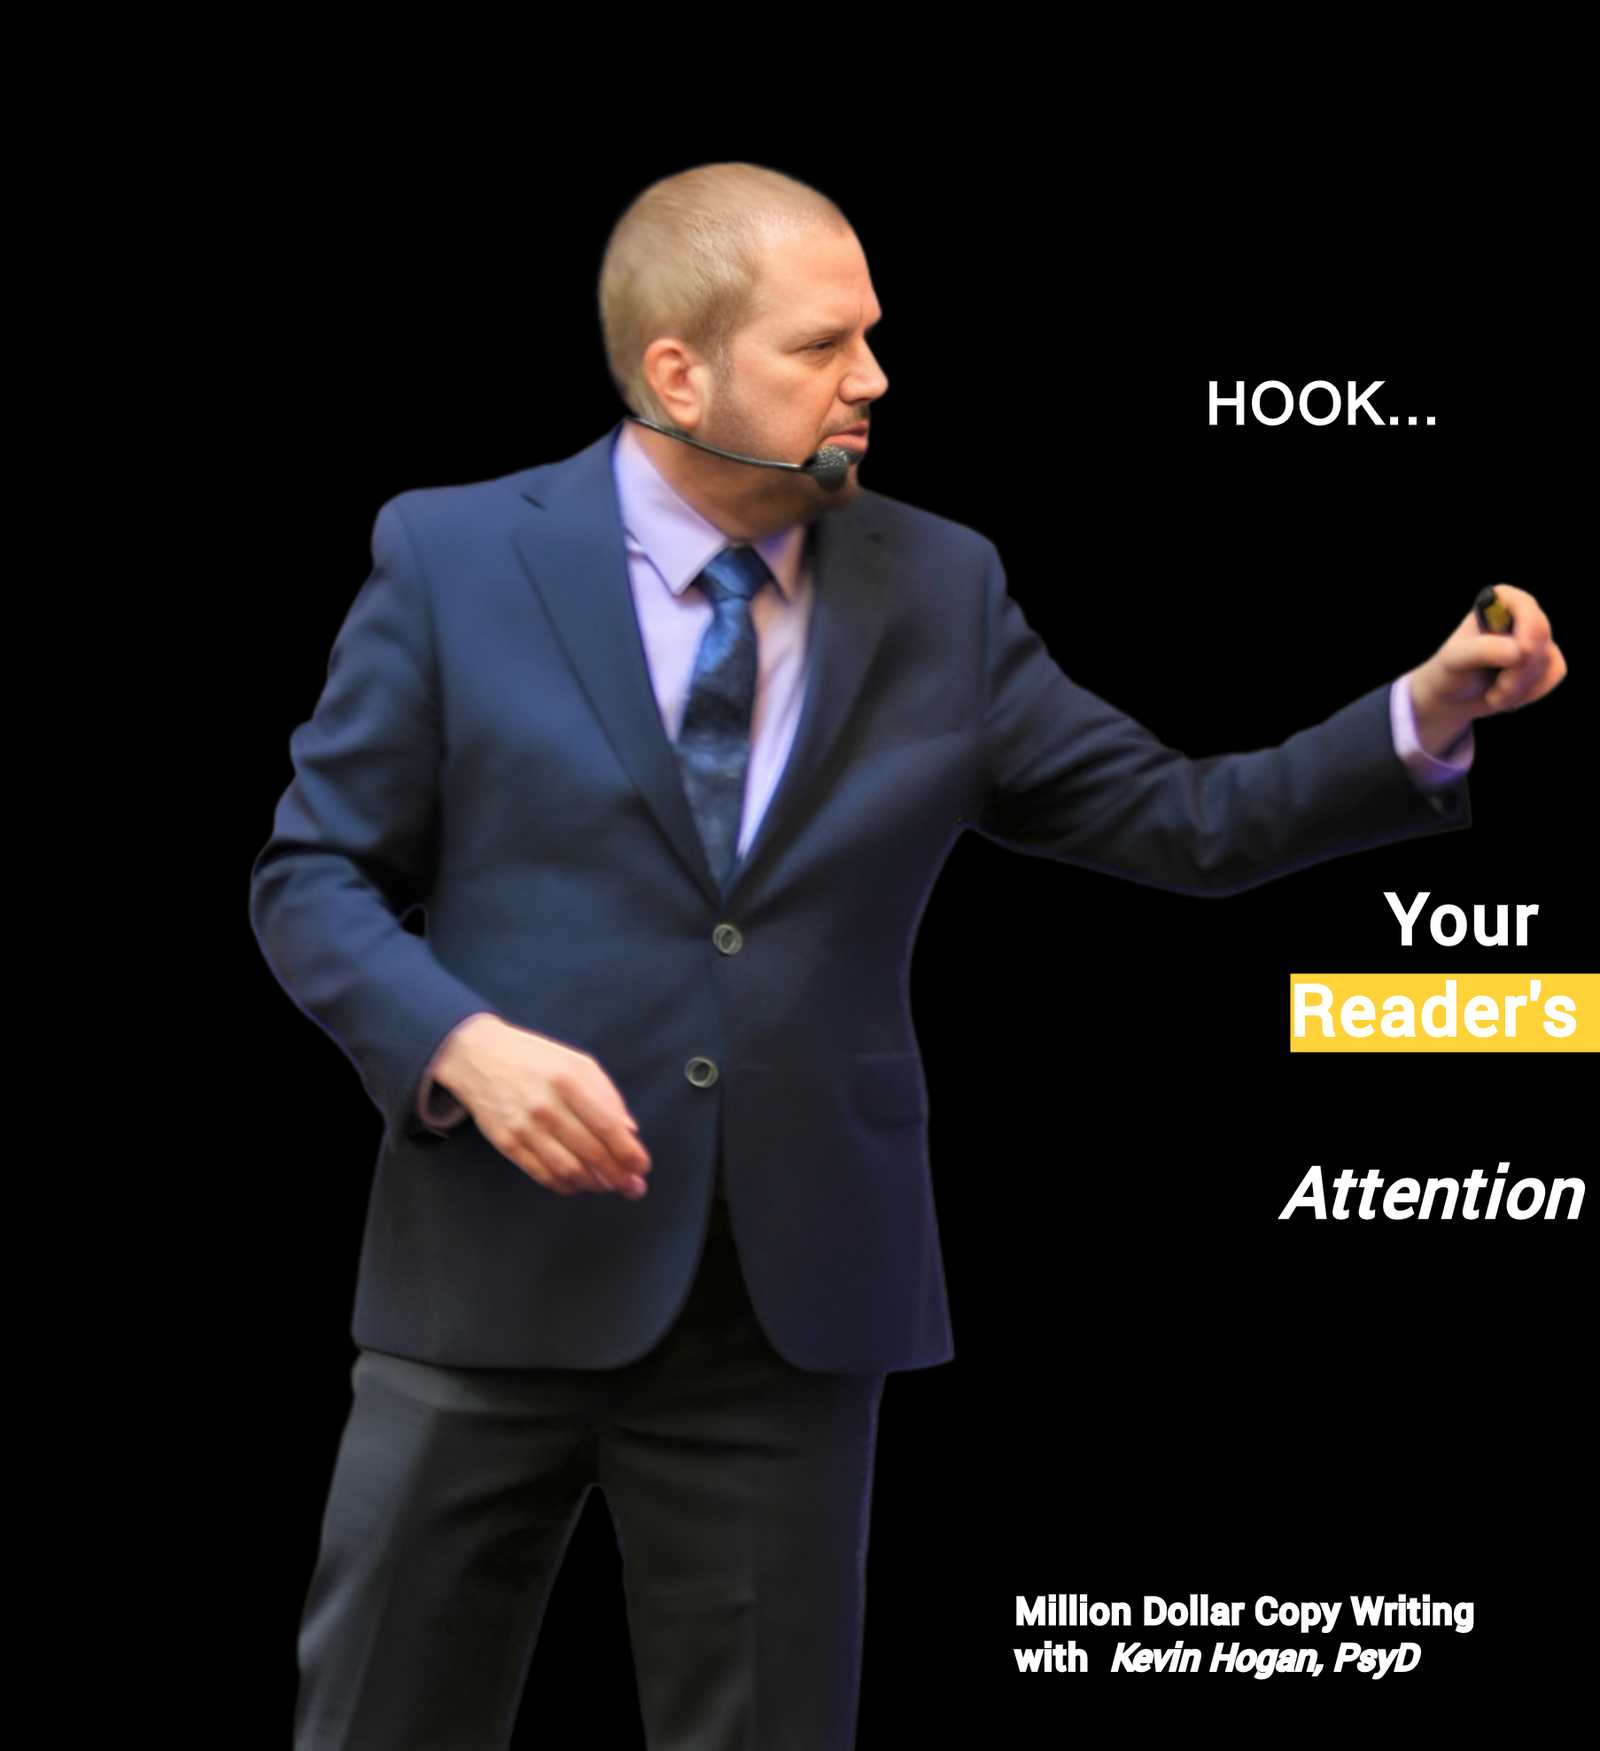 Hook Your Reader's Attention